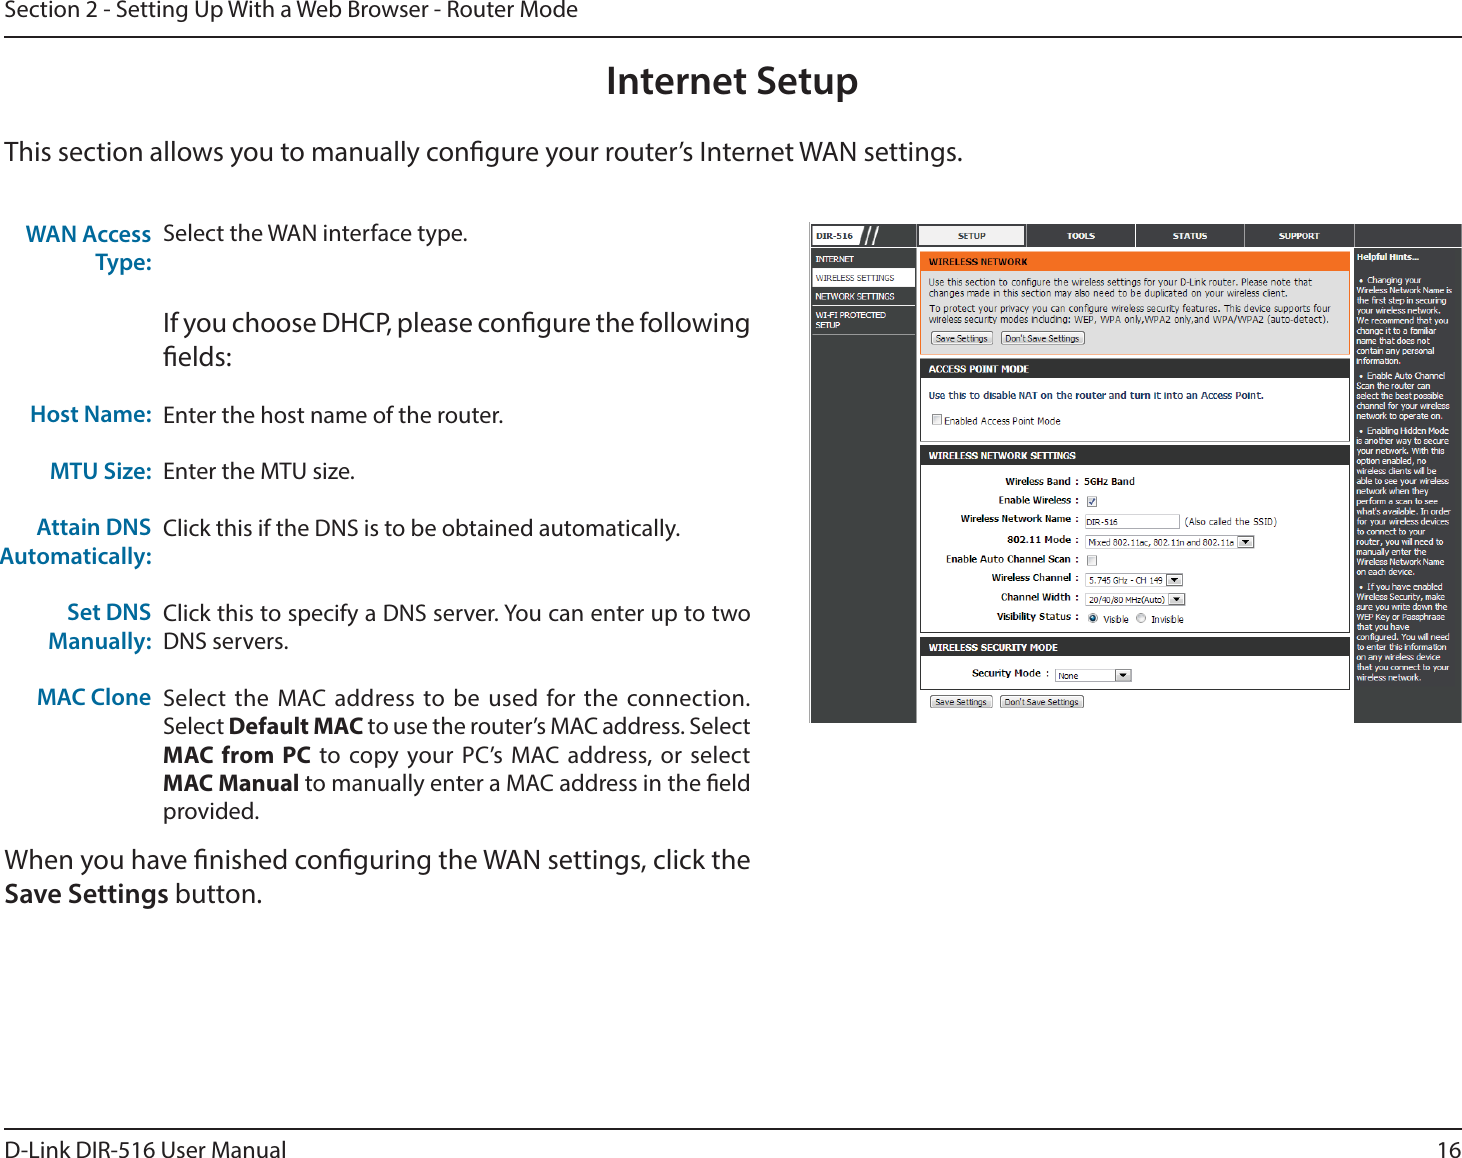 16D-Link DIR-516 User ManualSection 2 - Setting Up With a Web Browser - Router ModeInternet SetupThis section allows you to manually congure your router’s Internet WAN settings.Select the WAN interface type.If you choose DHCP, please congure the following elds:Enter the host name of the router.Enter the MTU size.Click this if the DNS is to be obtained automatically.Click this to specify a DNS server. You can enter up to two DNS servers.Select the MAC address to be used for the connection. Select Default MAC to use the router’s MAC address. Select MAC from PC to copy your PC’s MAC address, or select MAC Manual to manually enter a MAC address in the eld provided. WAN Access Type:Host Name:MTU Size:Attain DNS Automatically:Set DNS Manually:MAC Clone   When you have nished conguring the WAN settings, click the Save Settings button.